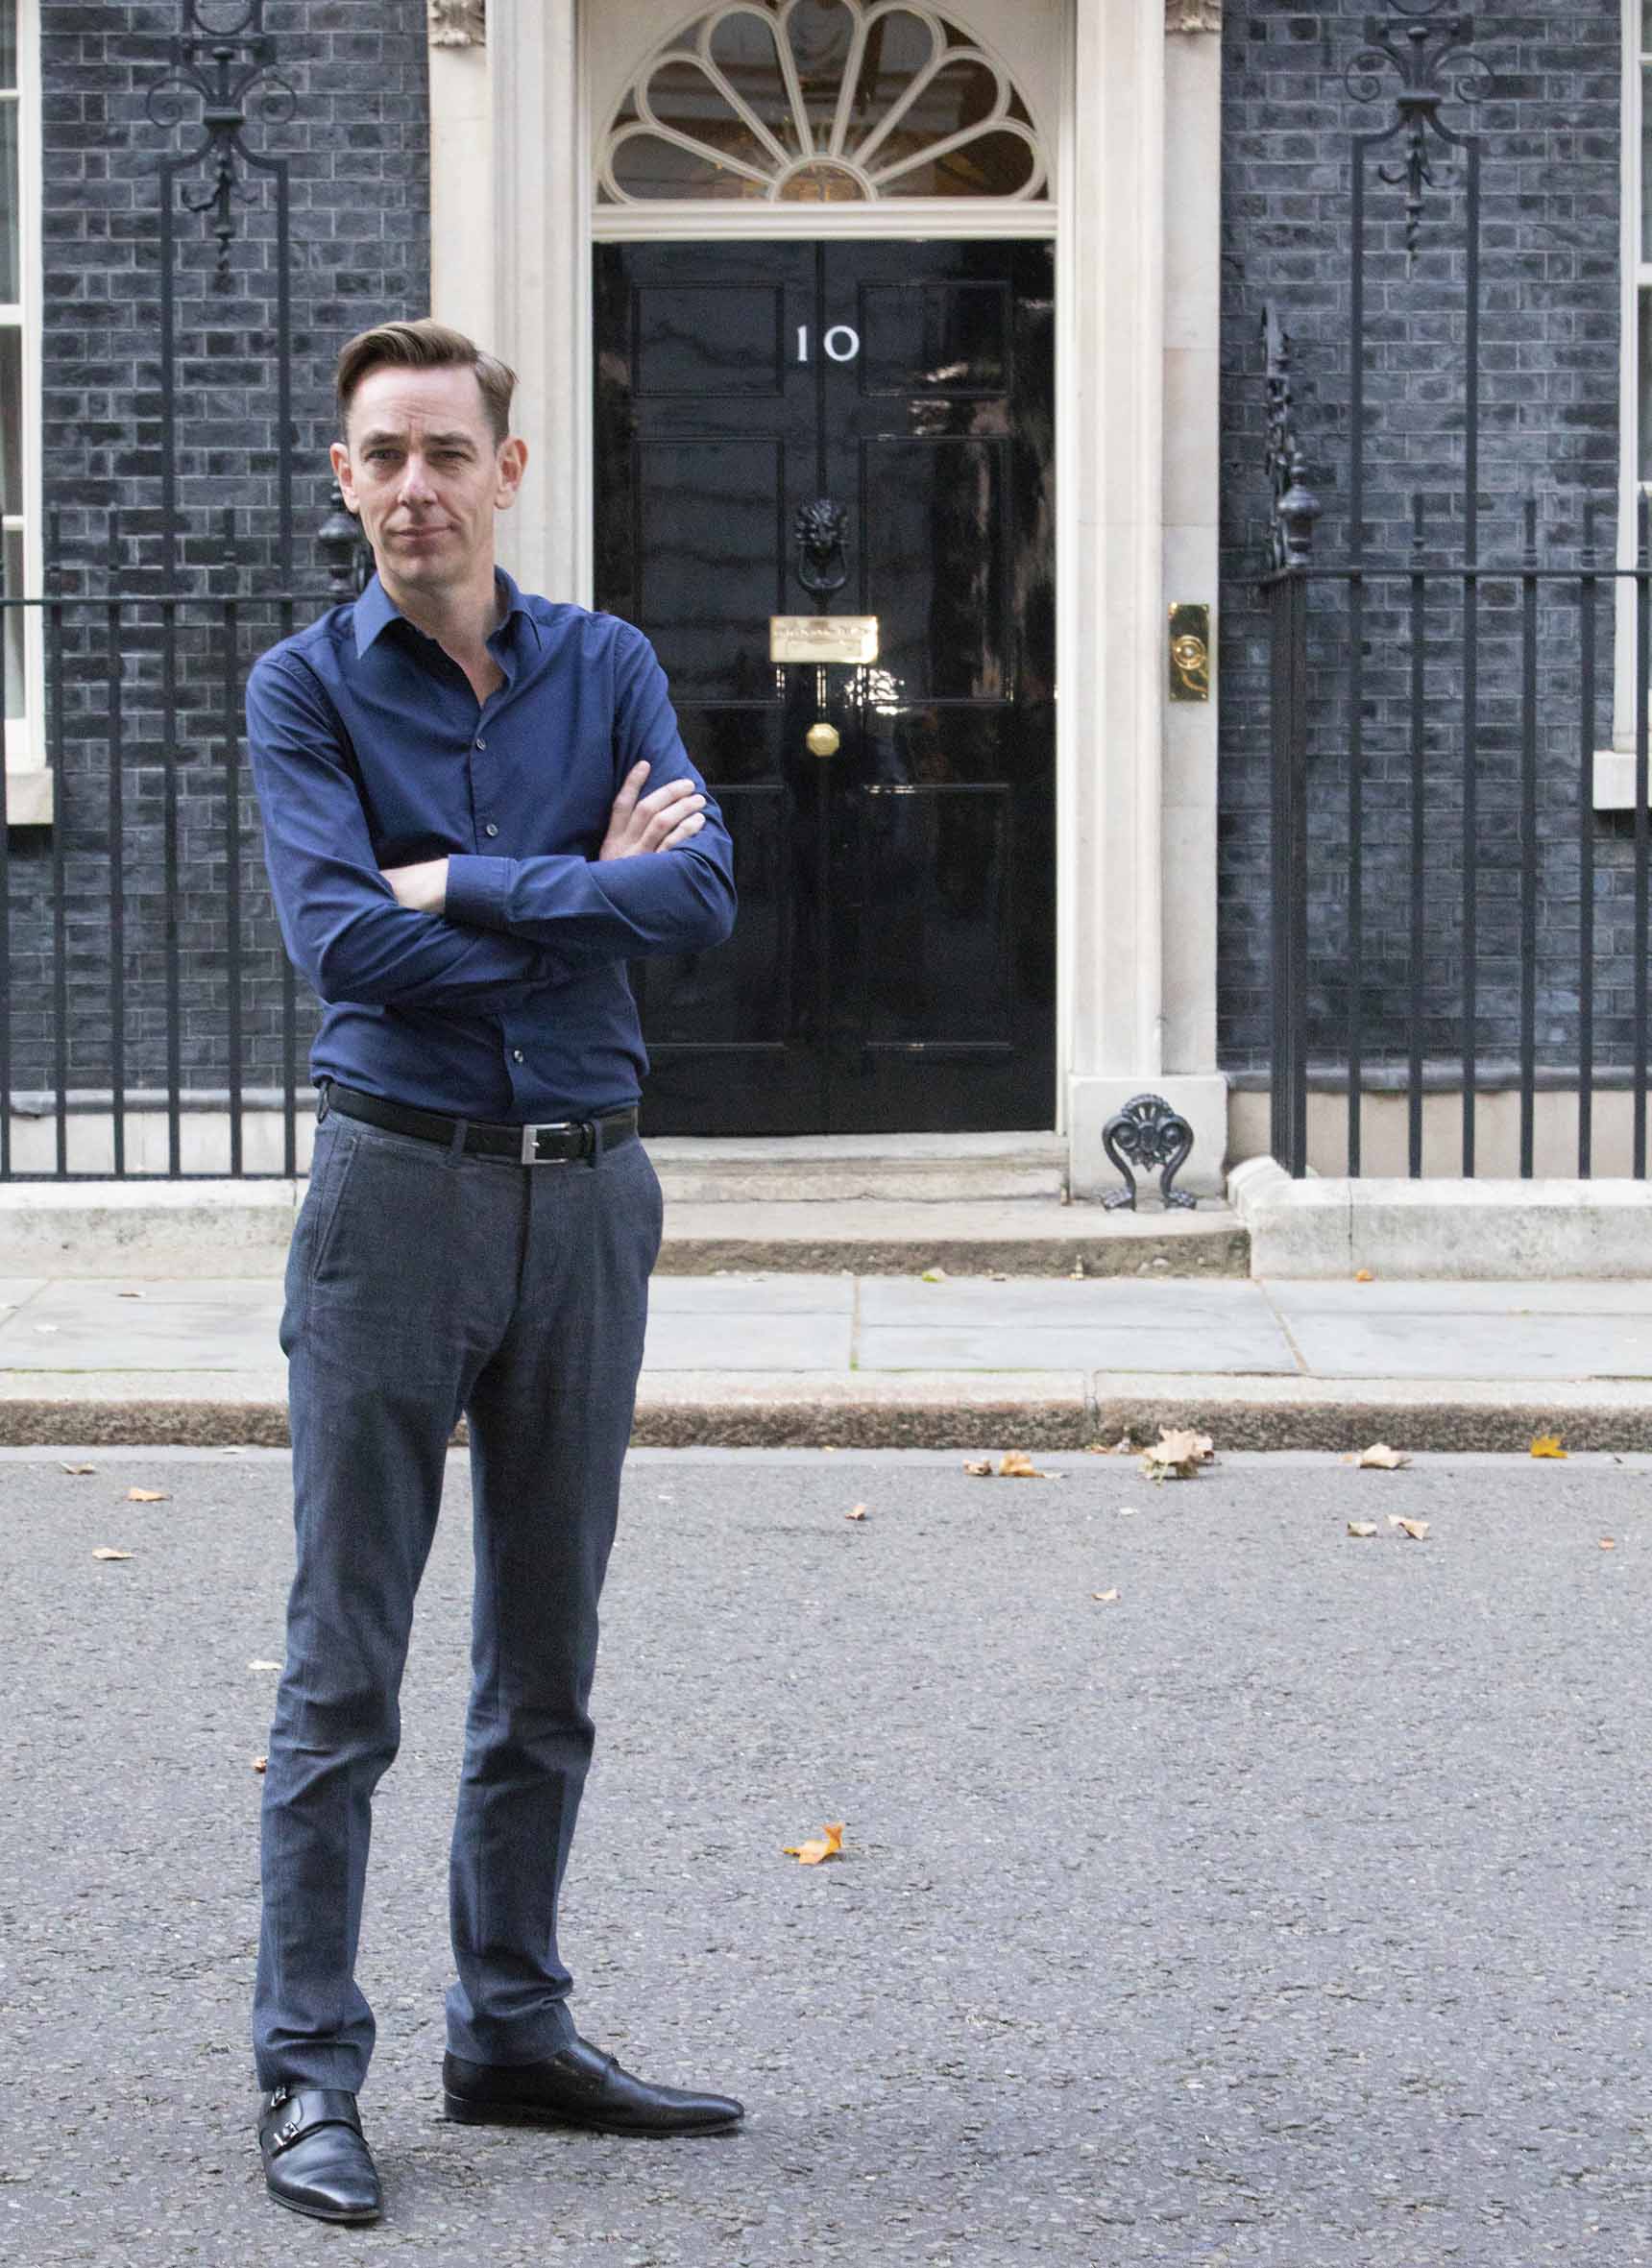 Ryan Tubridy outside 10 Downing Street in advance of tomorrow night's Late Late Show coming live from London